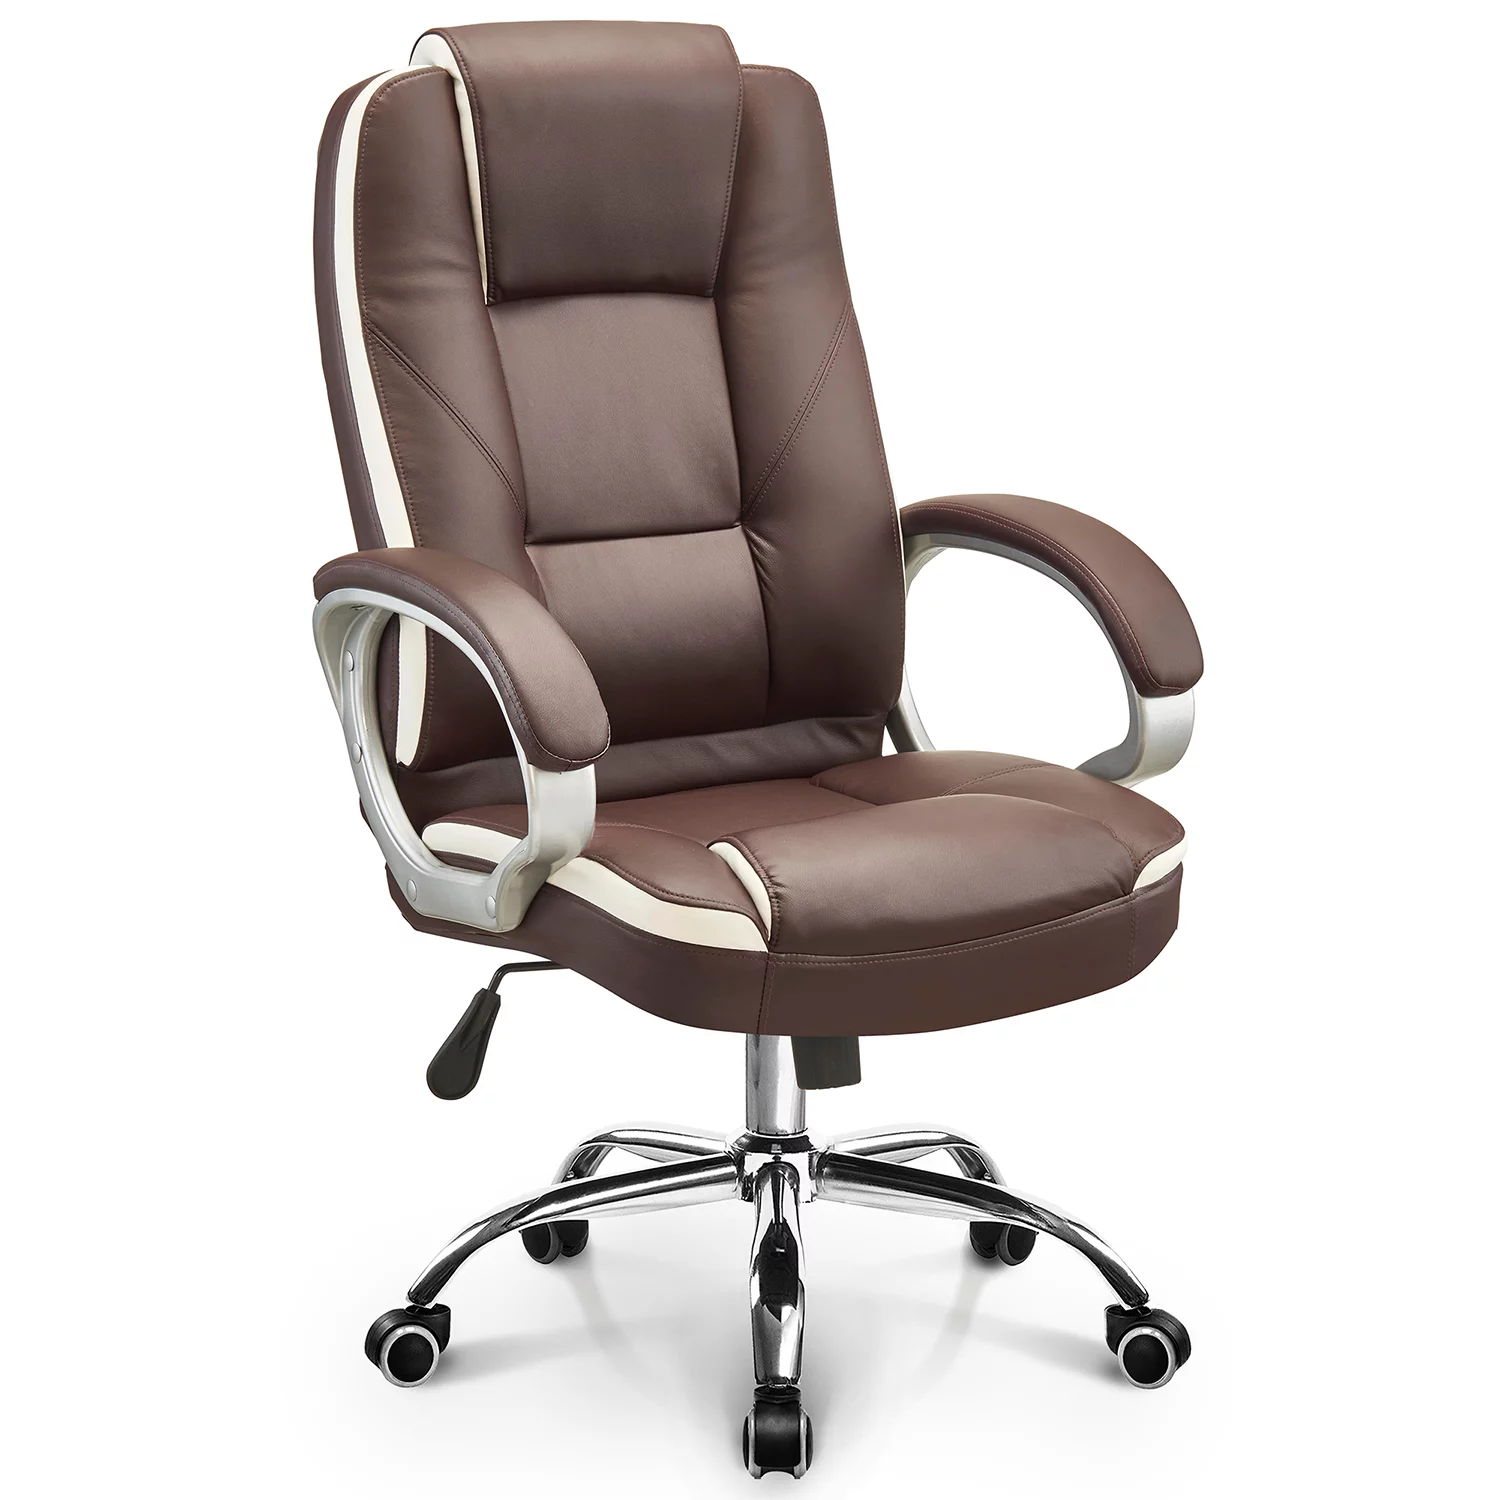 What Office Chair Is Best For Your Back